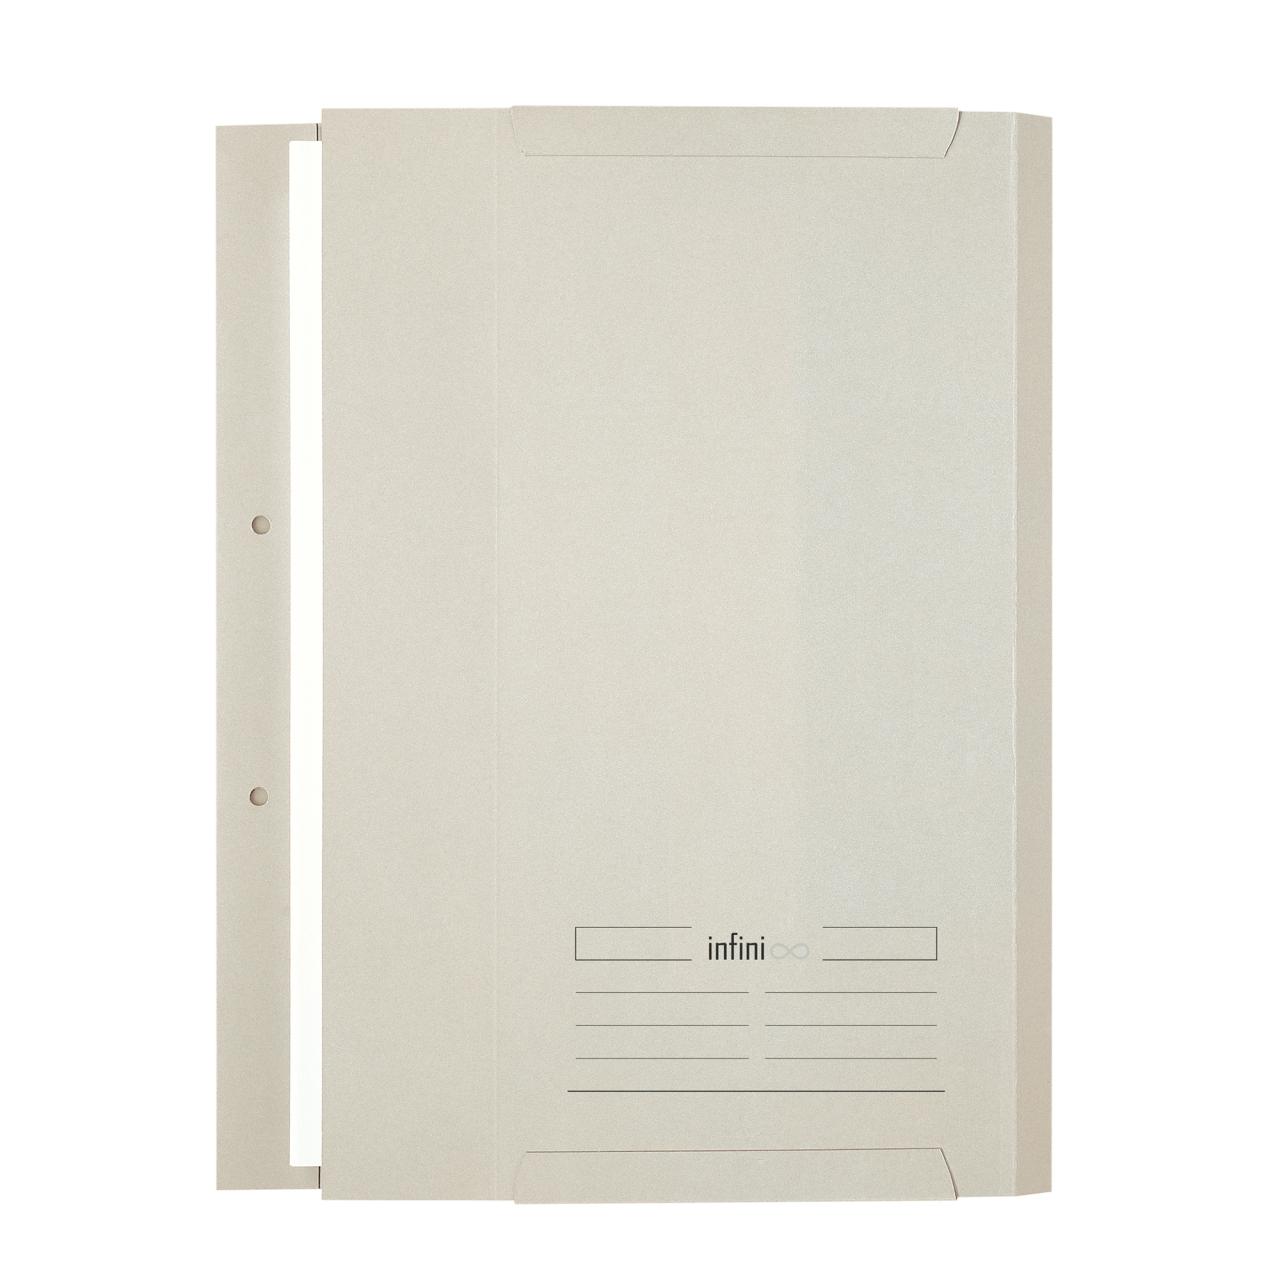 Infinio Perforated Pocket Folder, A4, 100% Recycled Cardboard, ICN1, FSC® 